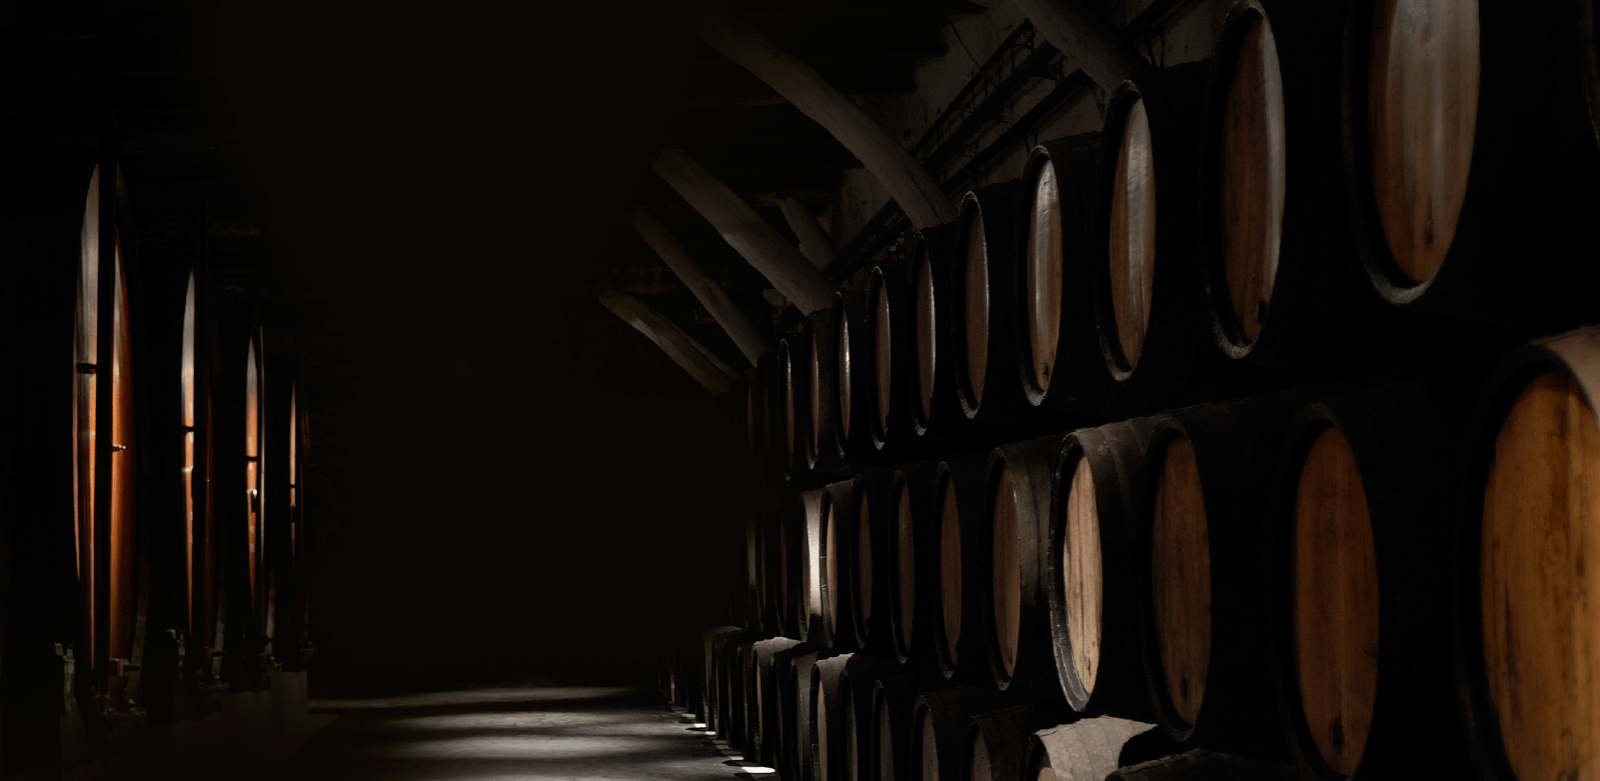 OUR GRAPPAS AGED IN BARRIQUES AND BARRELS OF REFINED WOOD